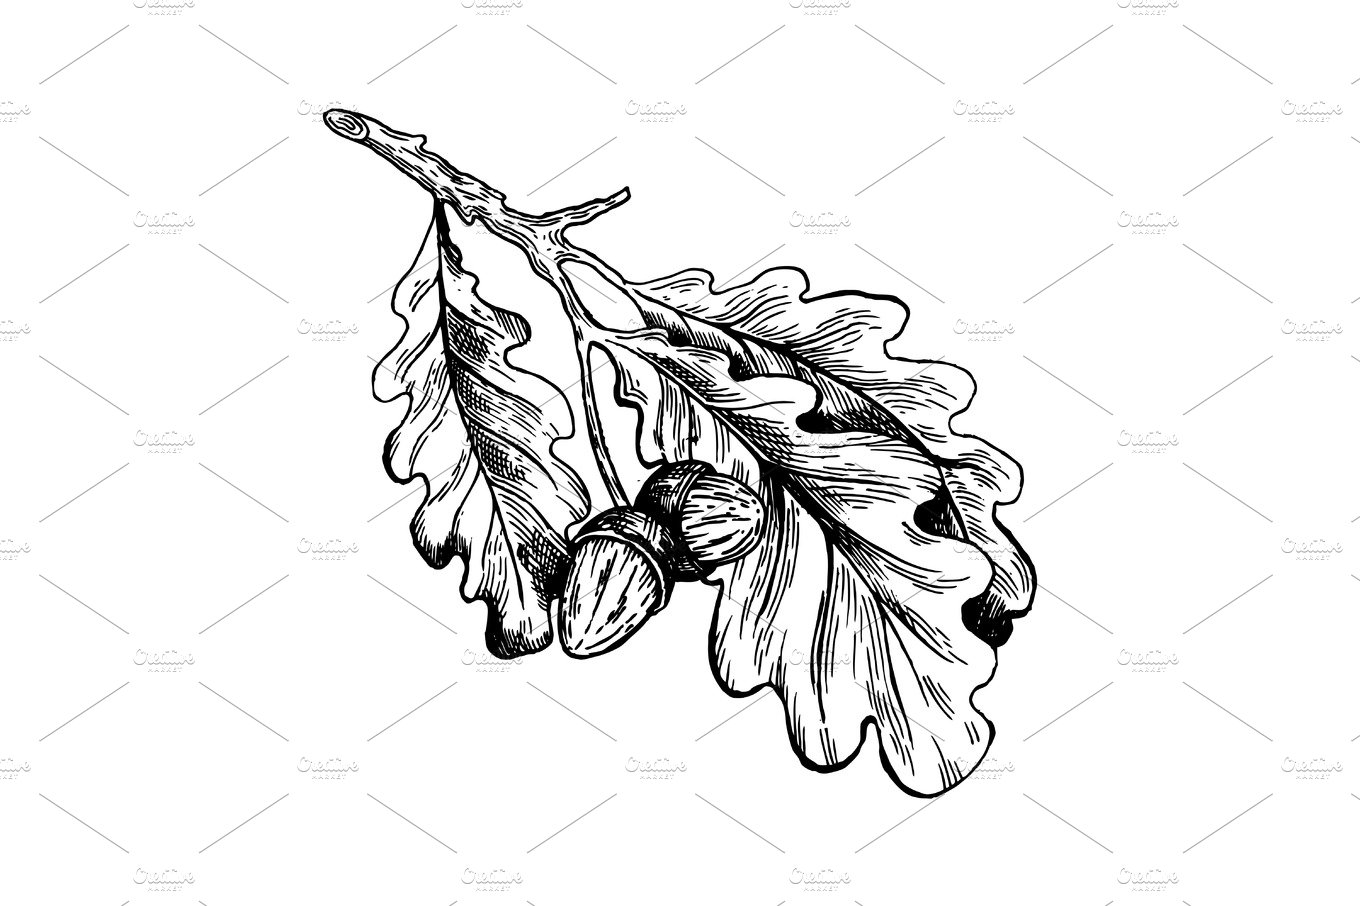 Oak branch with acorns engraving vector cover image.